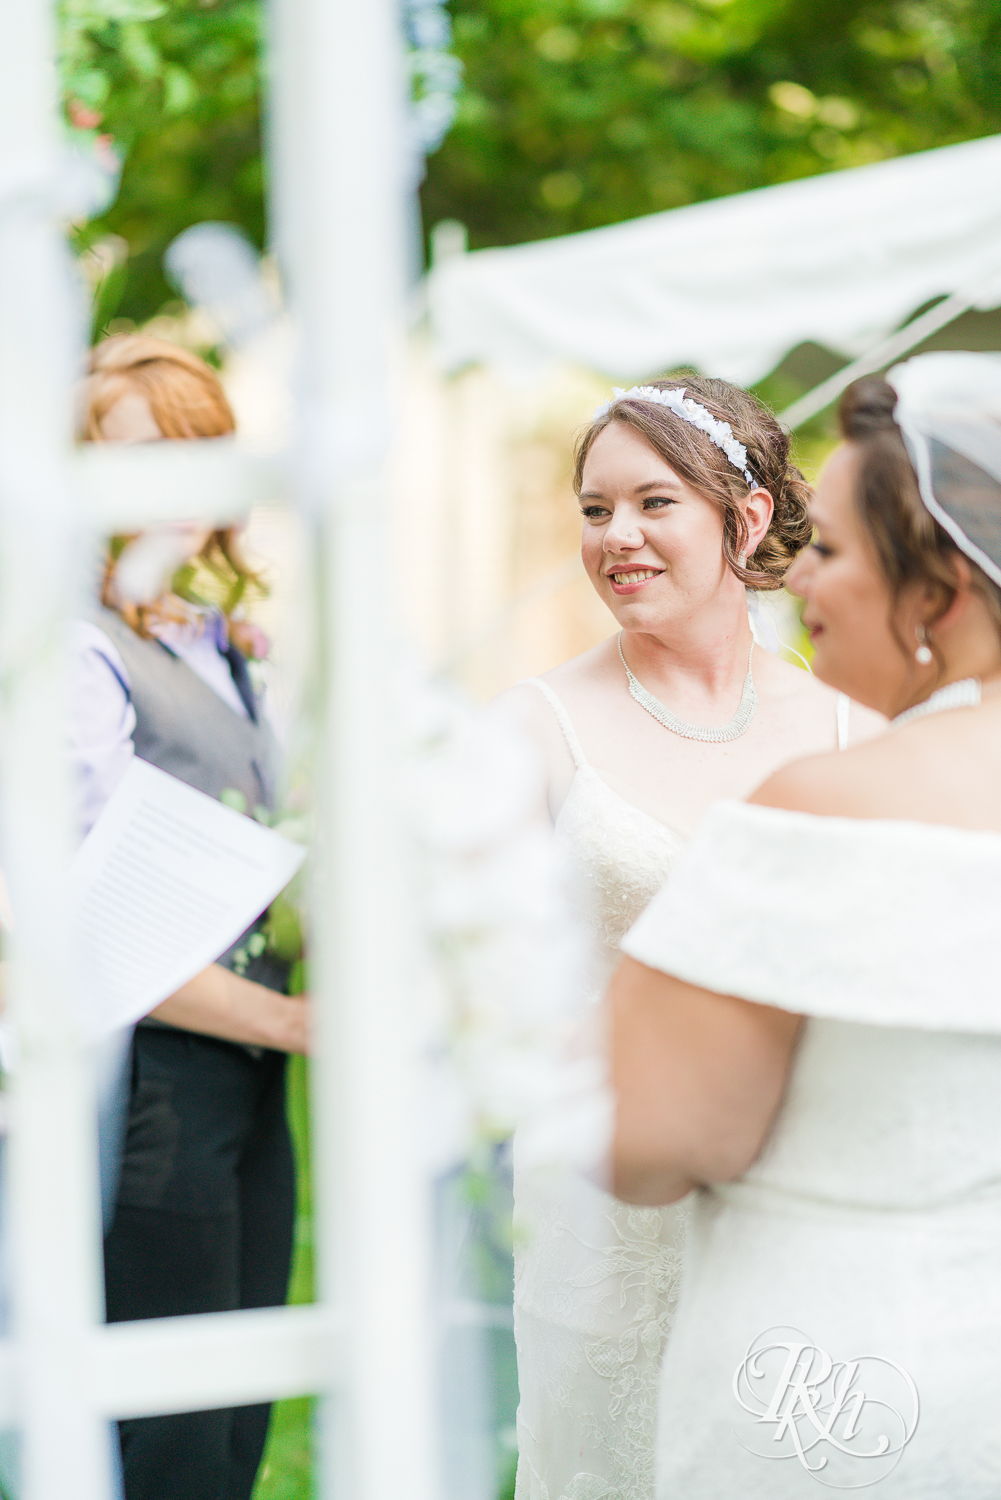 Lesbian brides smiling during outdoor wedding ceremony in Minnesota.